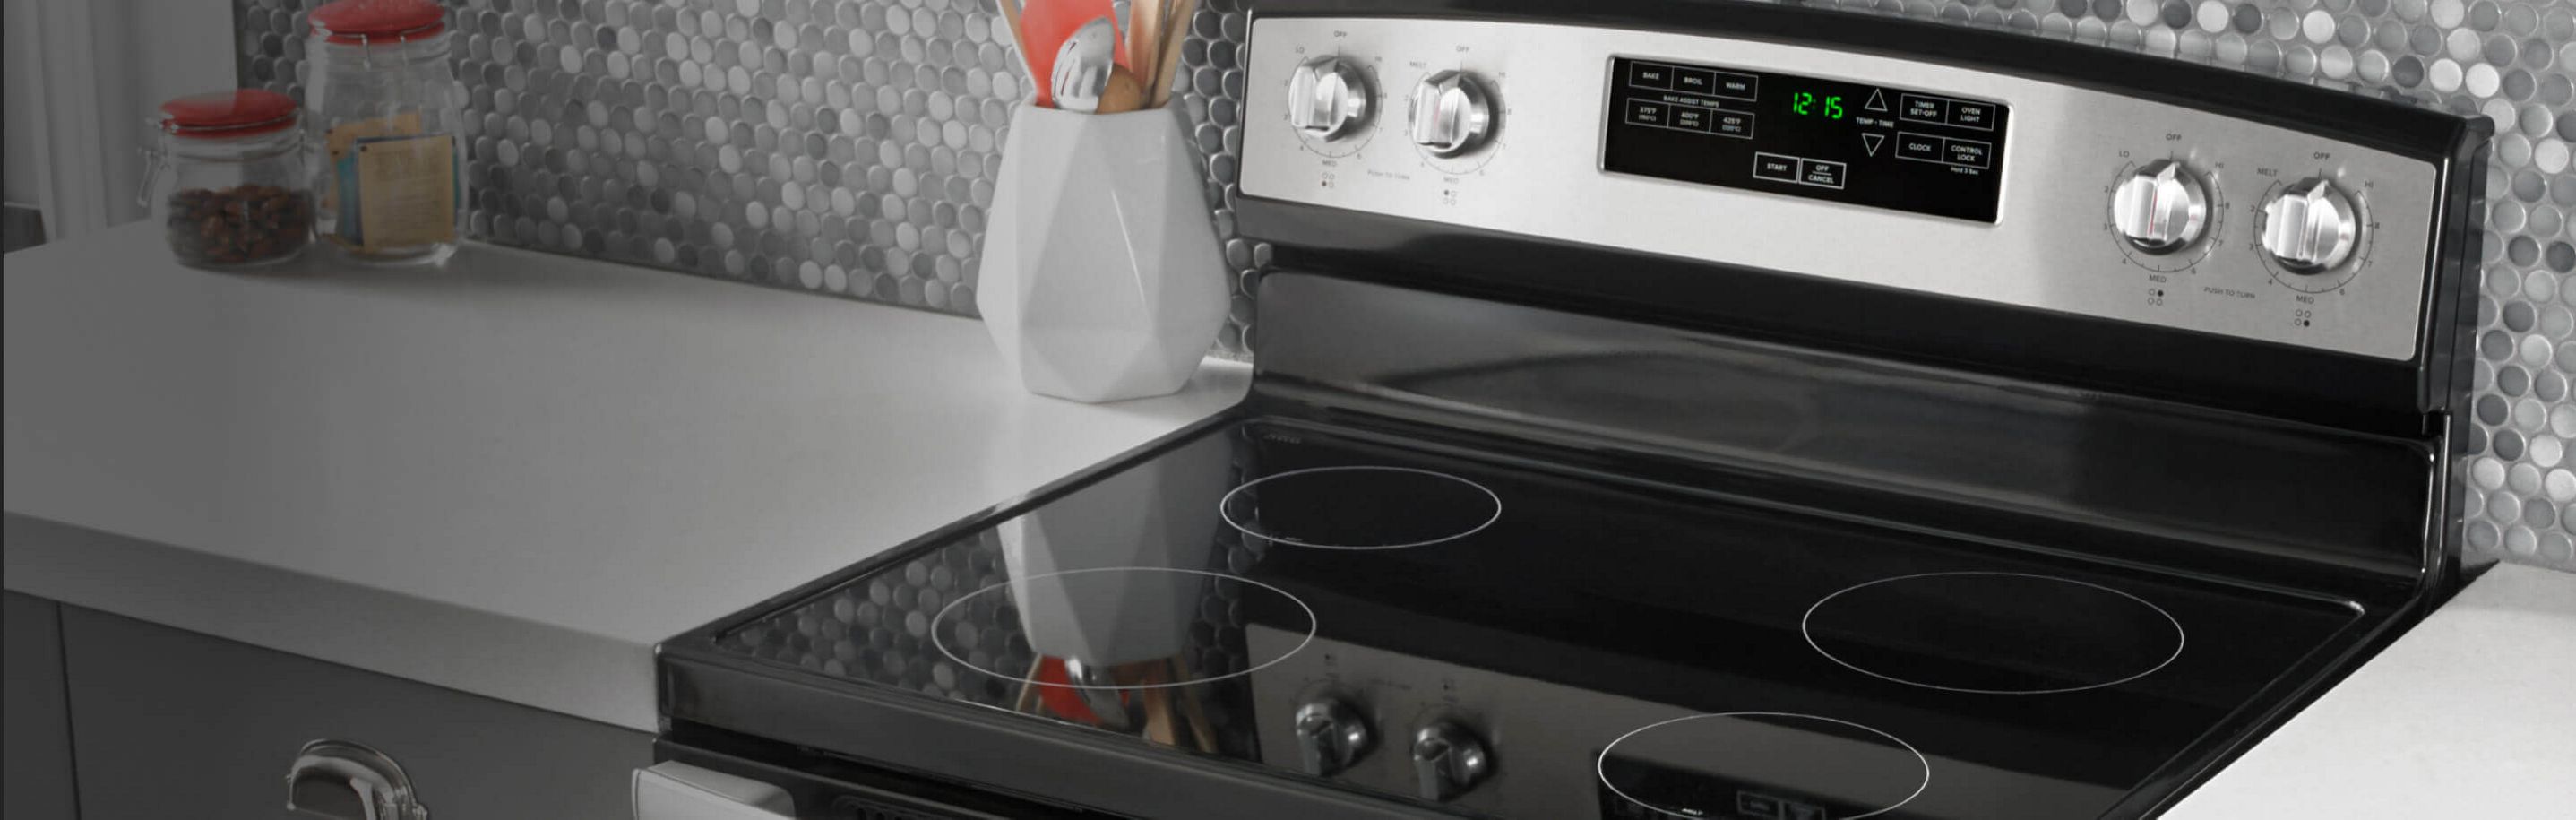 Amana® range with electric cooktop